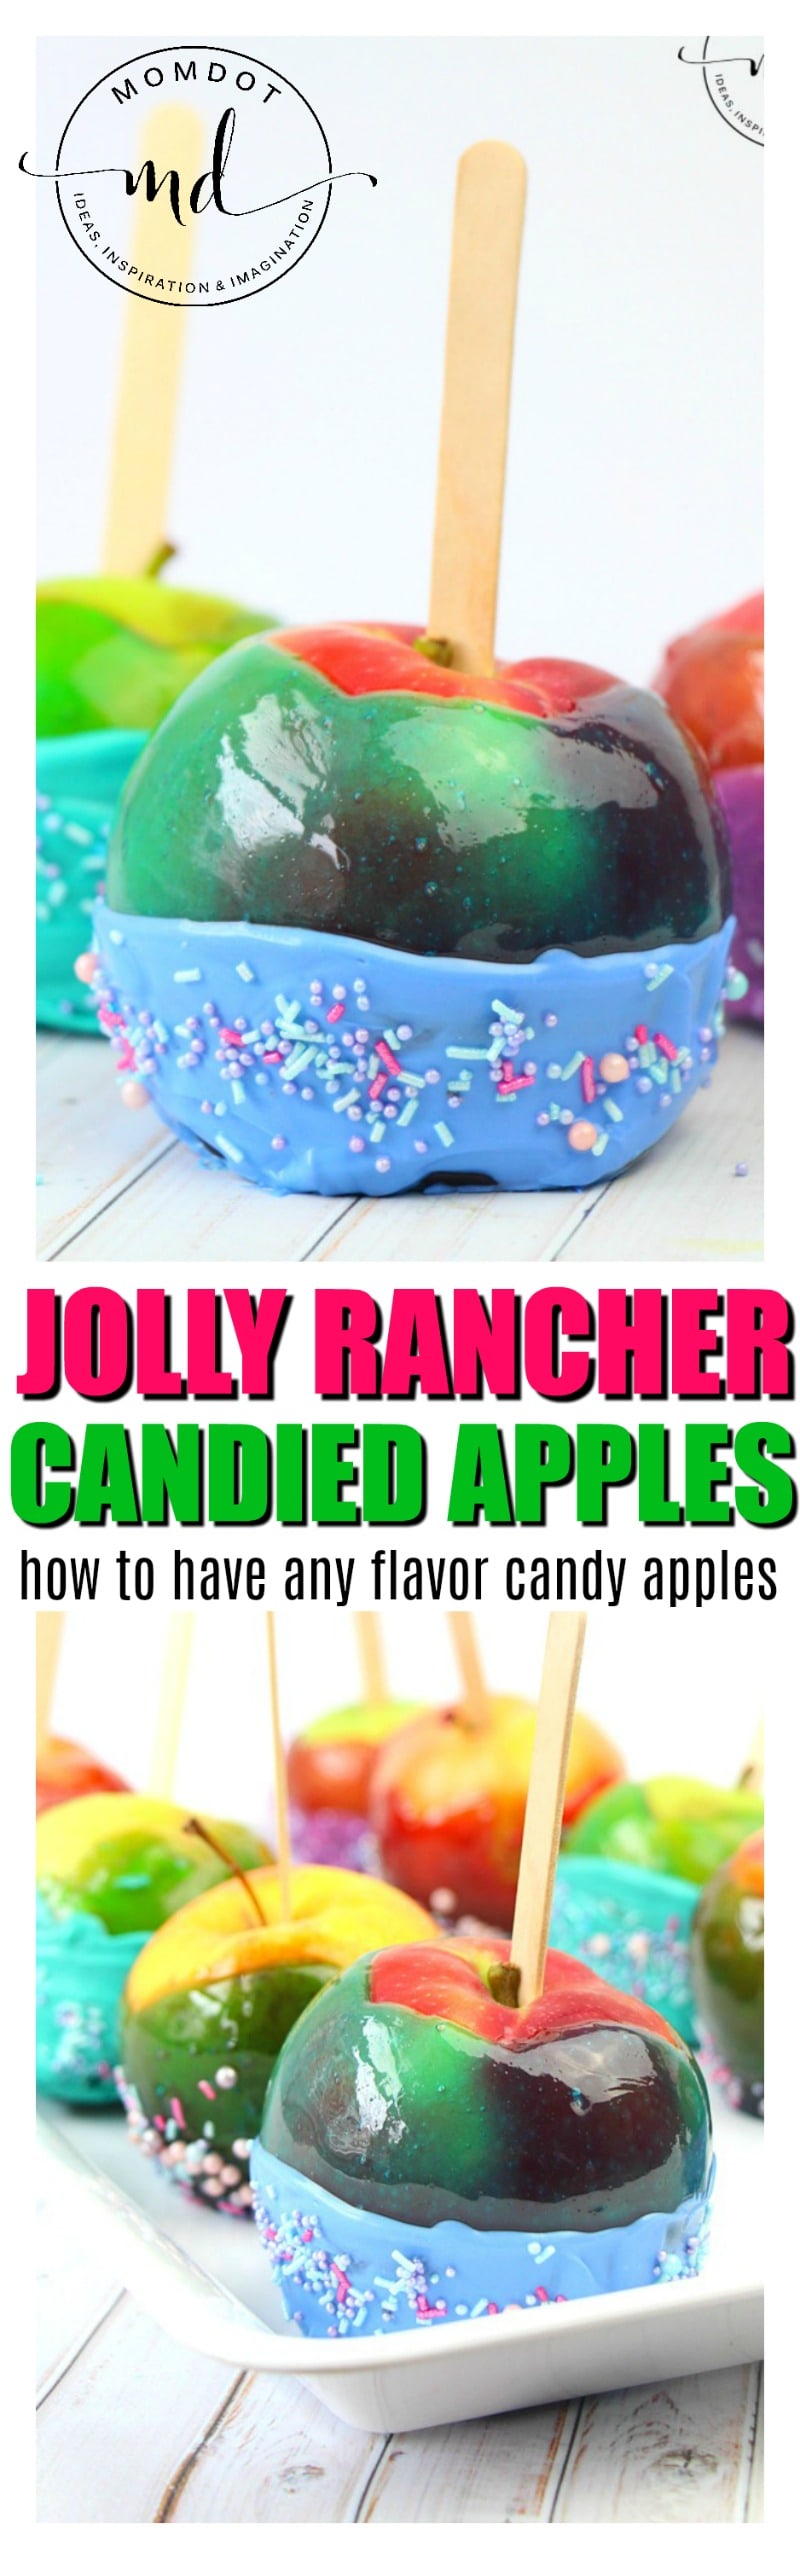 Jolly Rancher Candy Apples : How to make candied apples with jolly ranchers